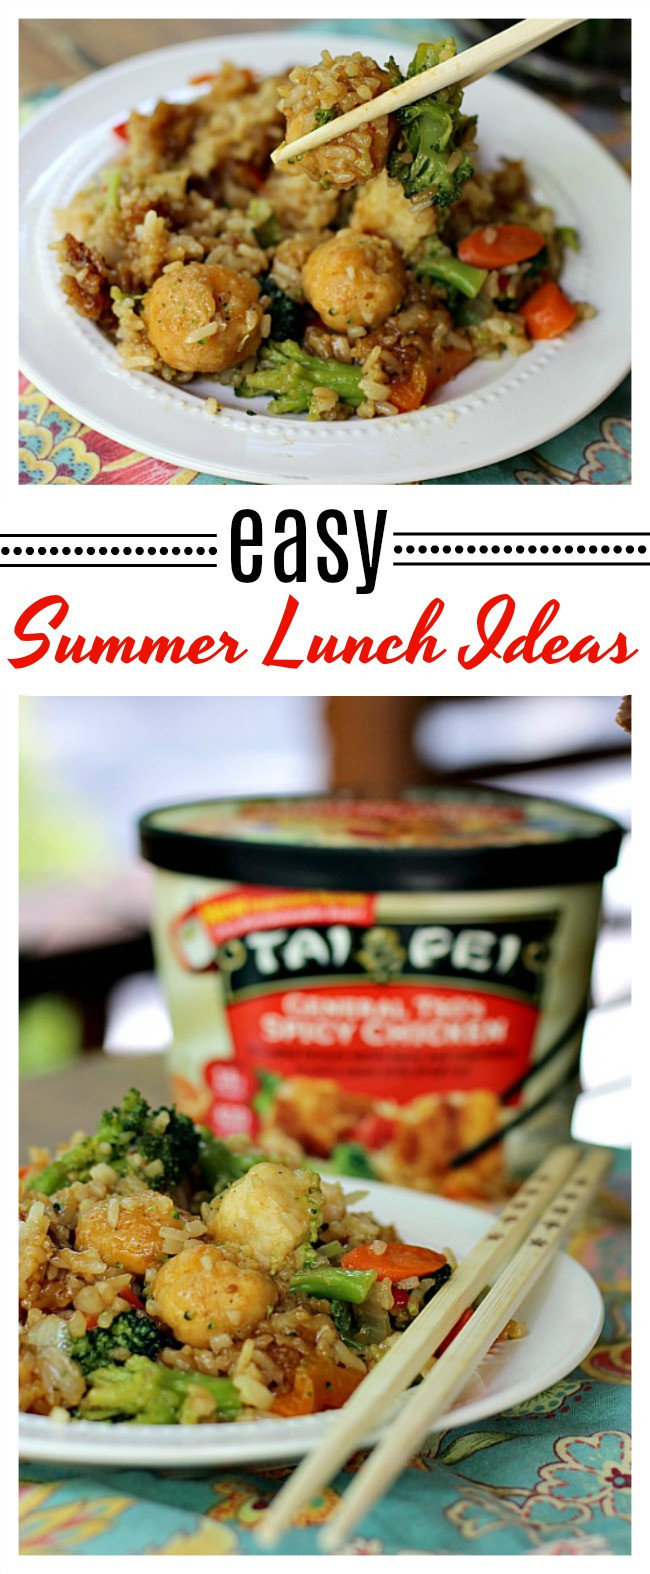 Easy Summer Lunch Ideas
 Easy Summer Lunch Ideas The Adventures of J Man and